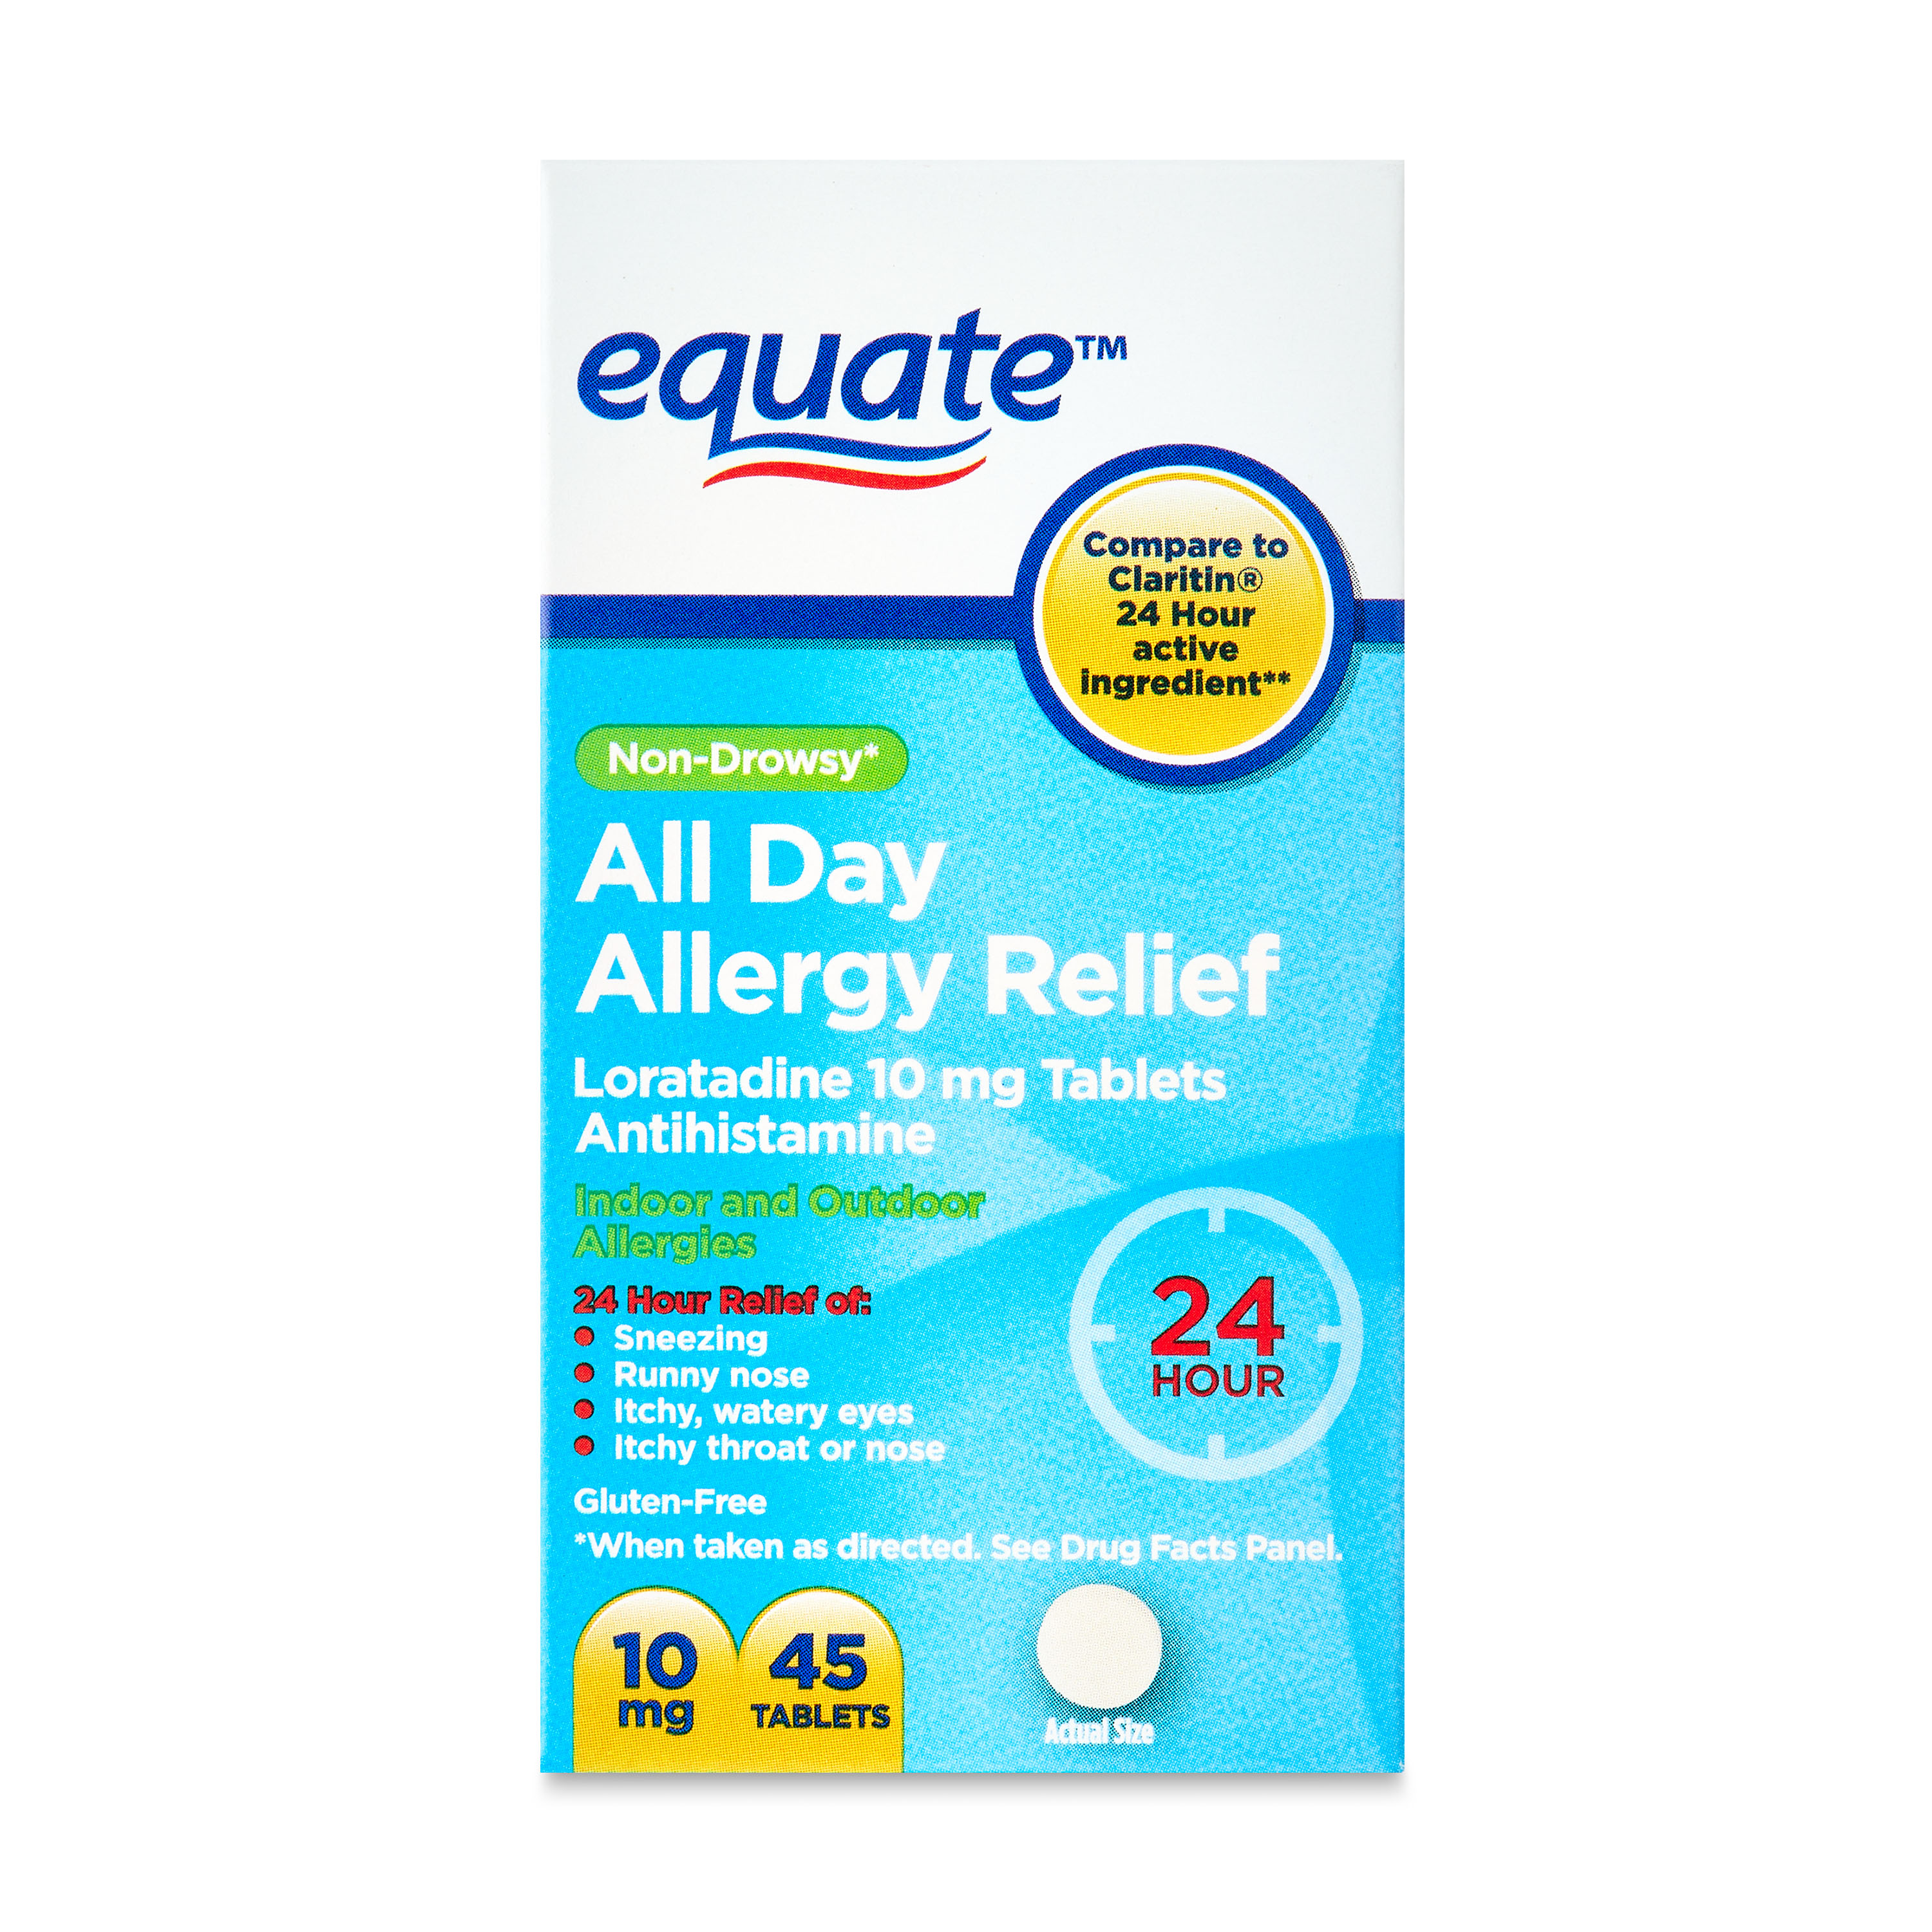 Equate Allergy Relief Loratadine Tablets 10 mg, Antihistamine, 45 Count - image 1 of 11